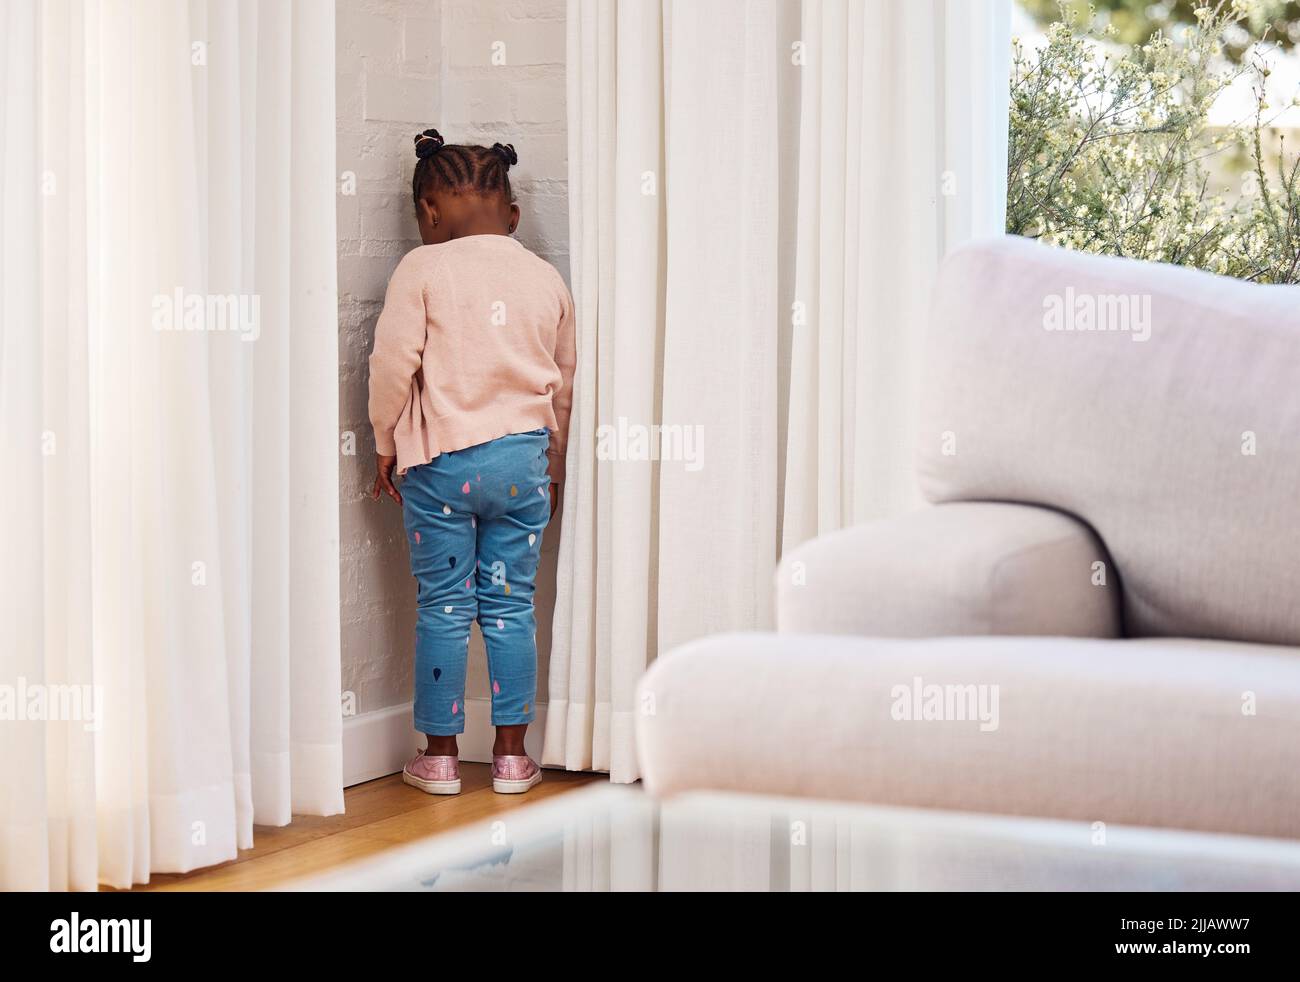 Shes been sent to timeout. a little girl standing in the corner as a punishment at home. Stock Photo